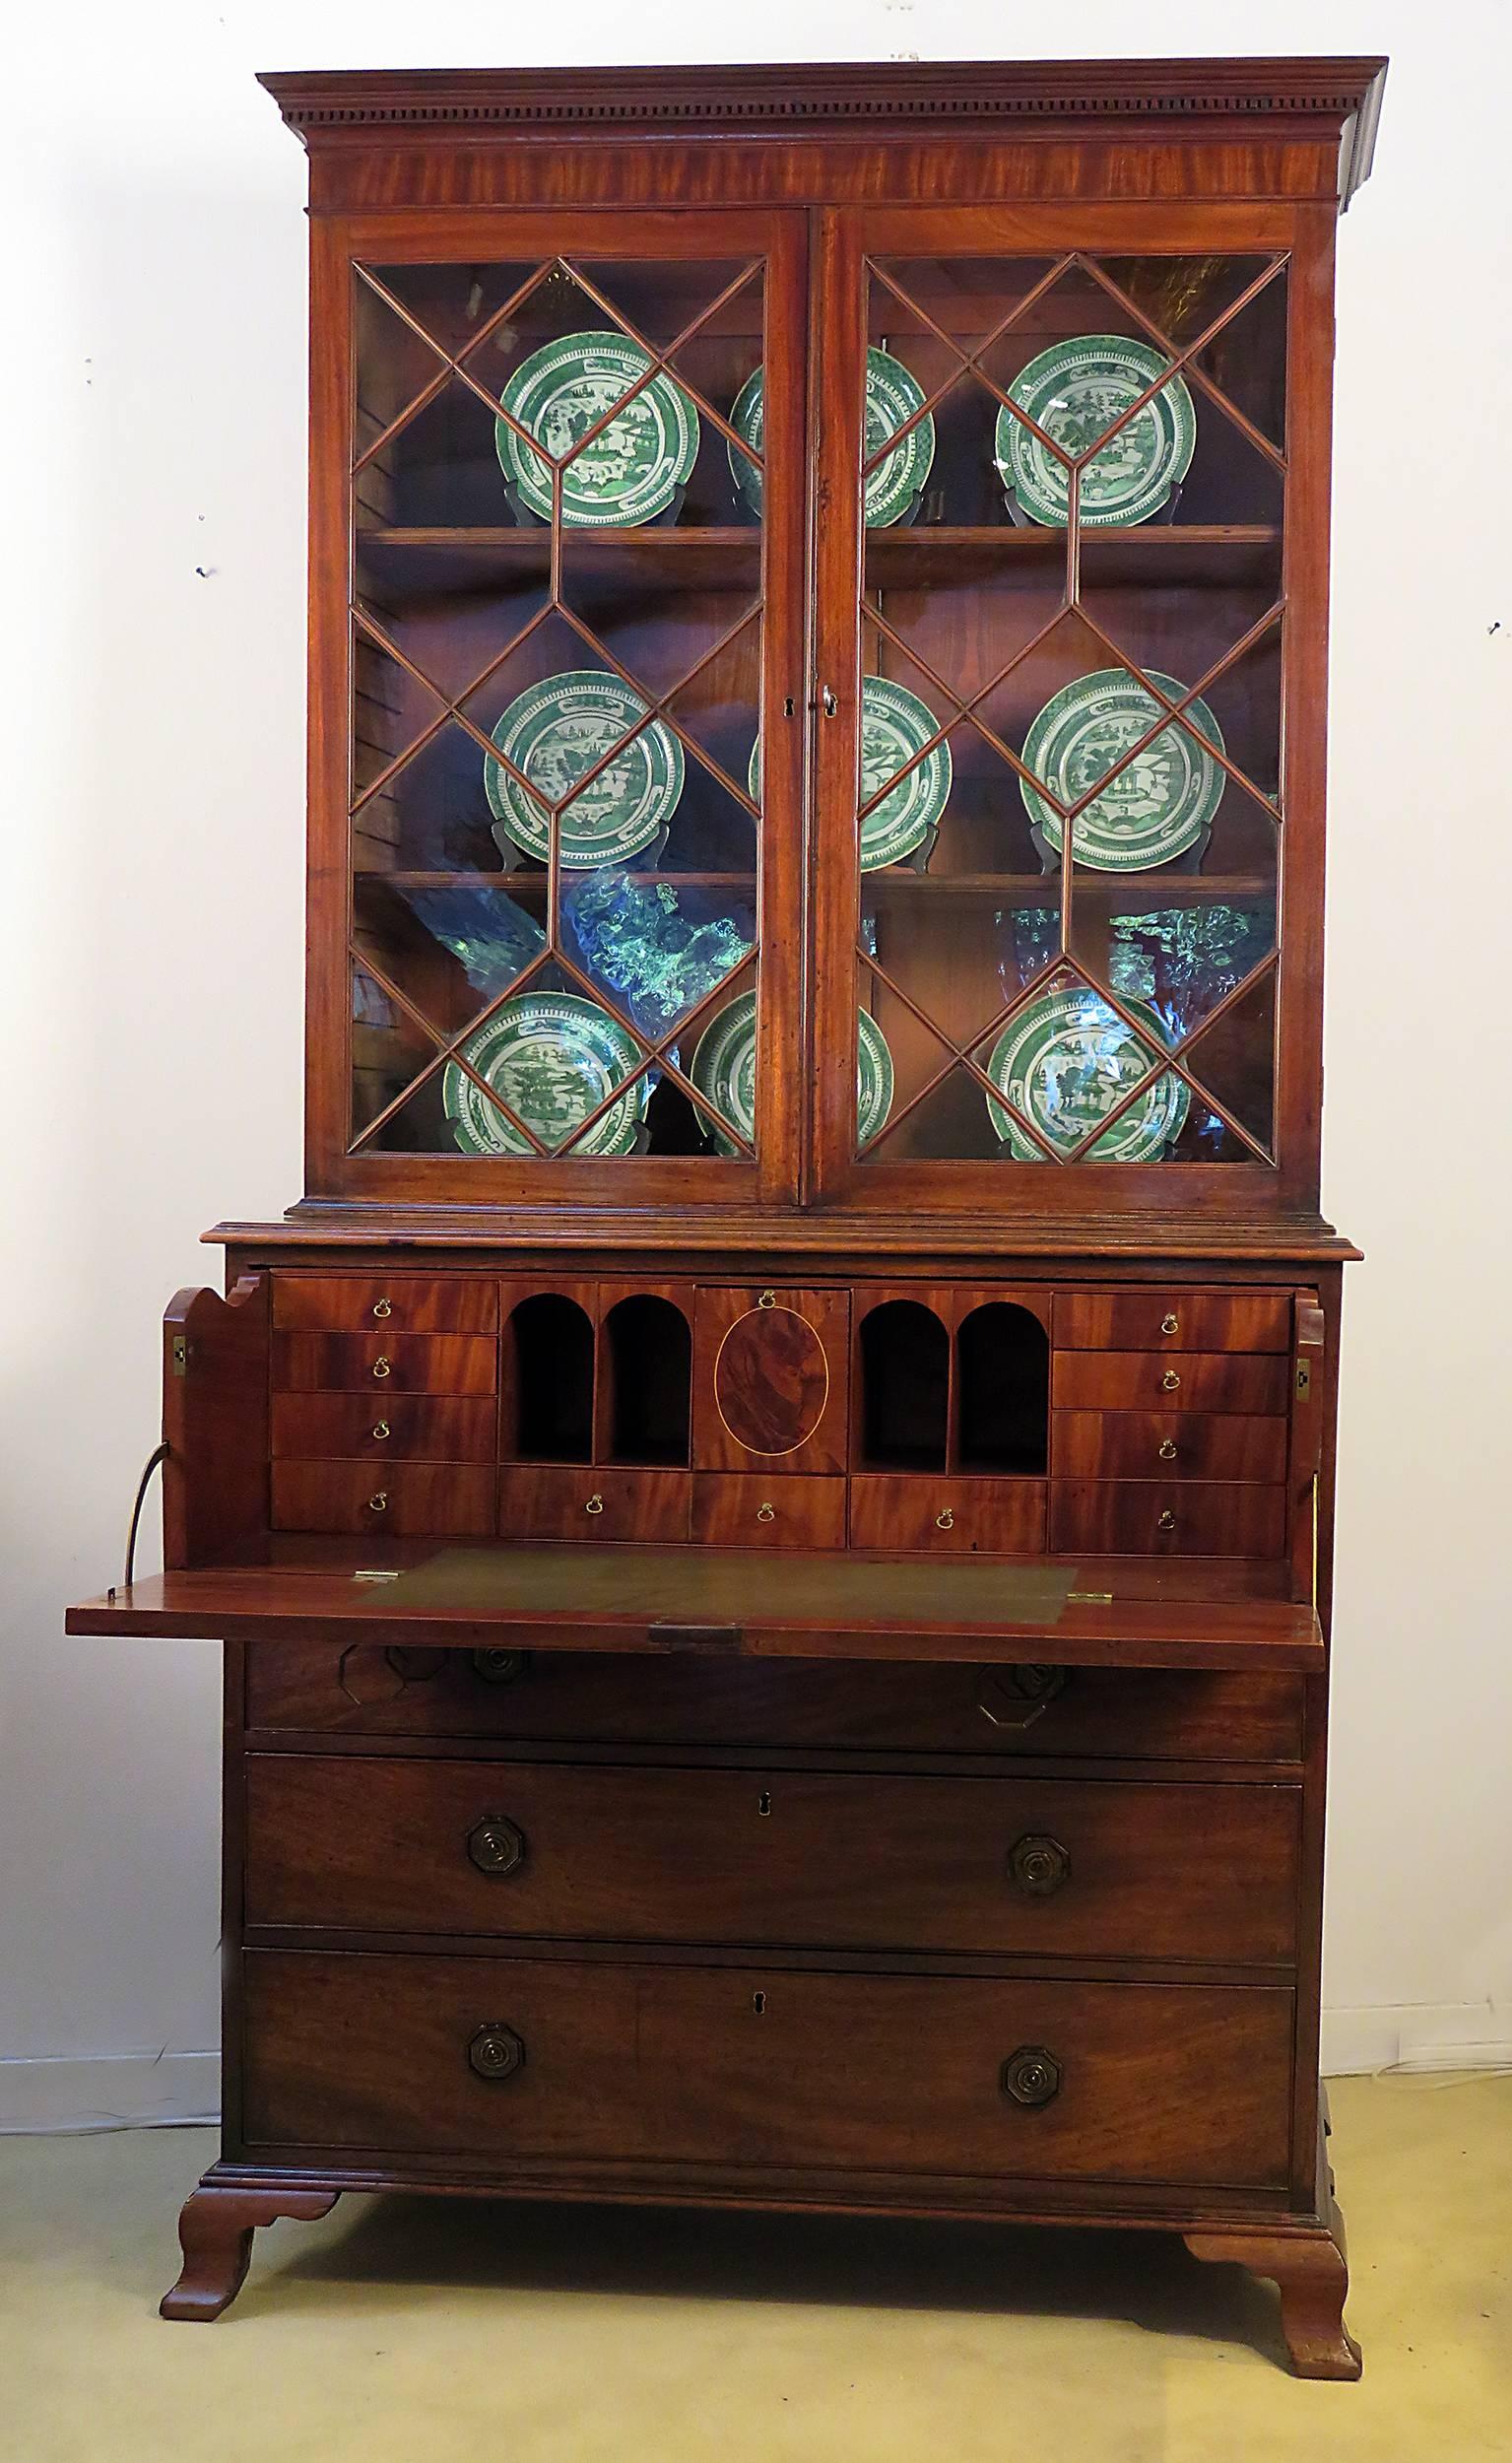 A very nice George III period mahogany secretary bookcase made in England during the last quarter of the 18th century. Standing on ogee bracket feet with beautifully glazed doors and what appears to be original handles. From a good old collection